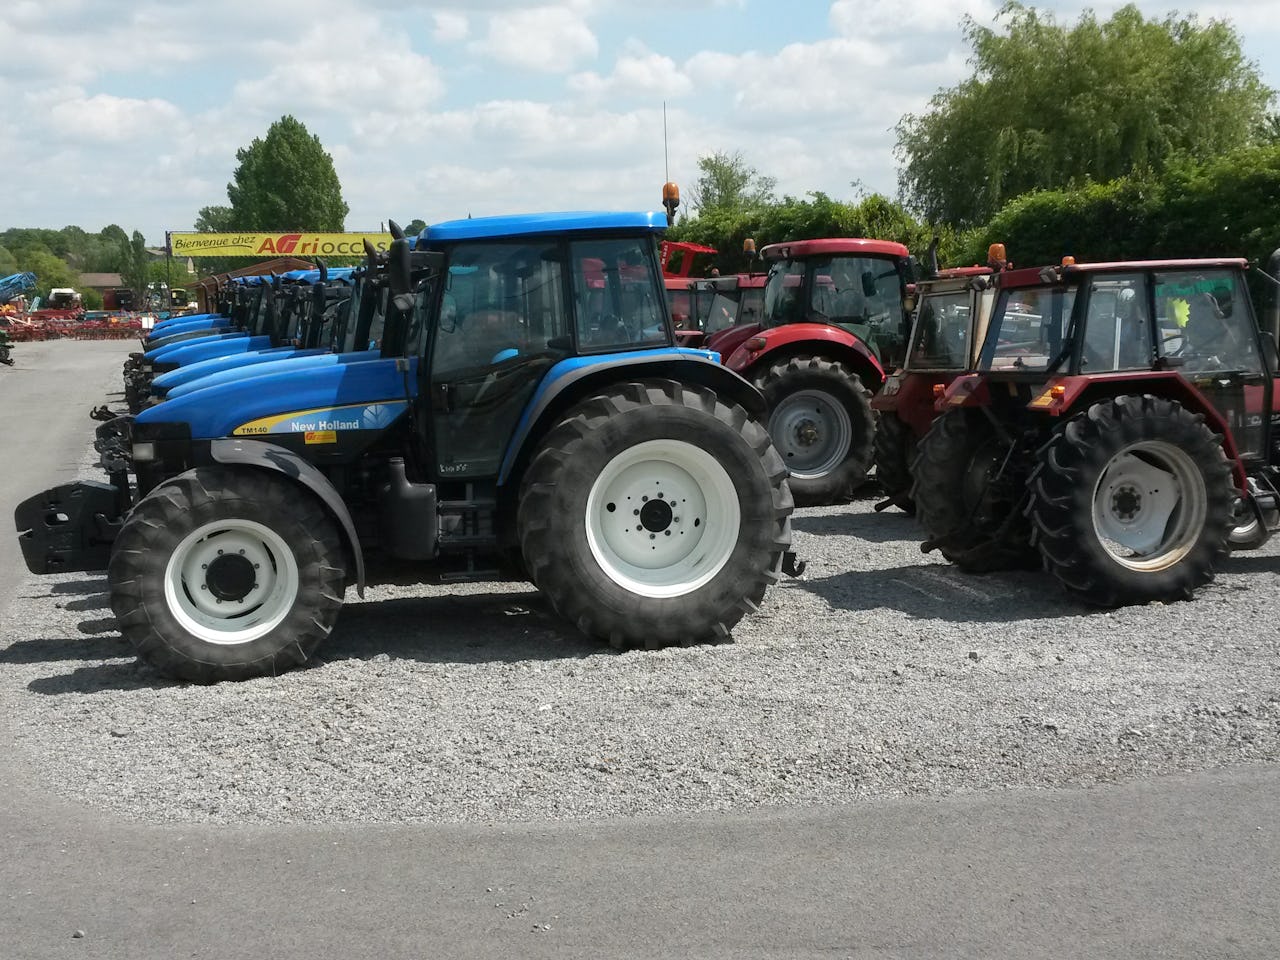 Tractor Auction UK